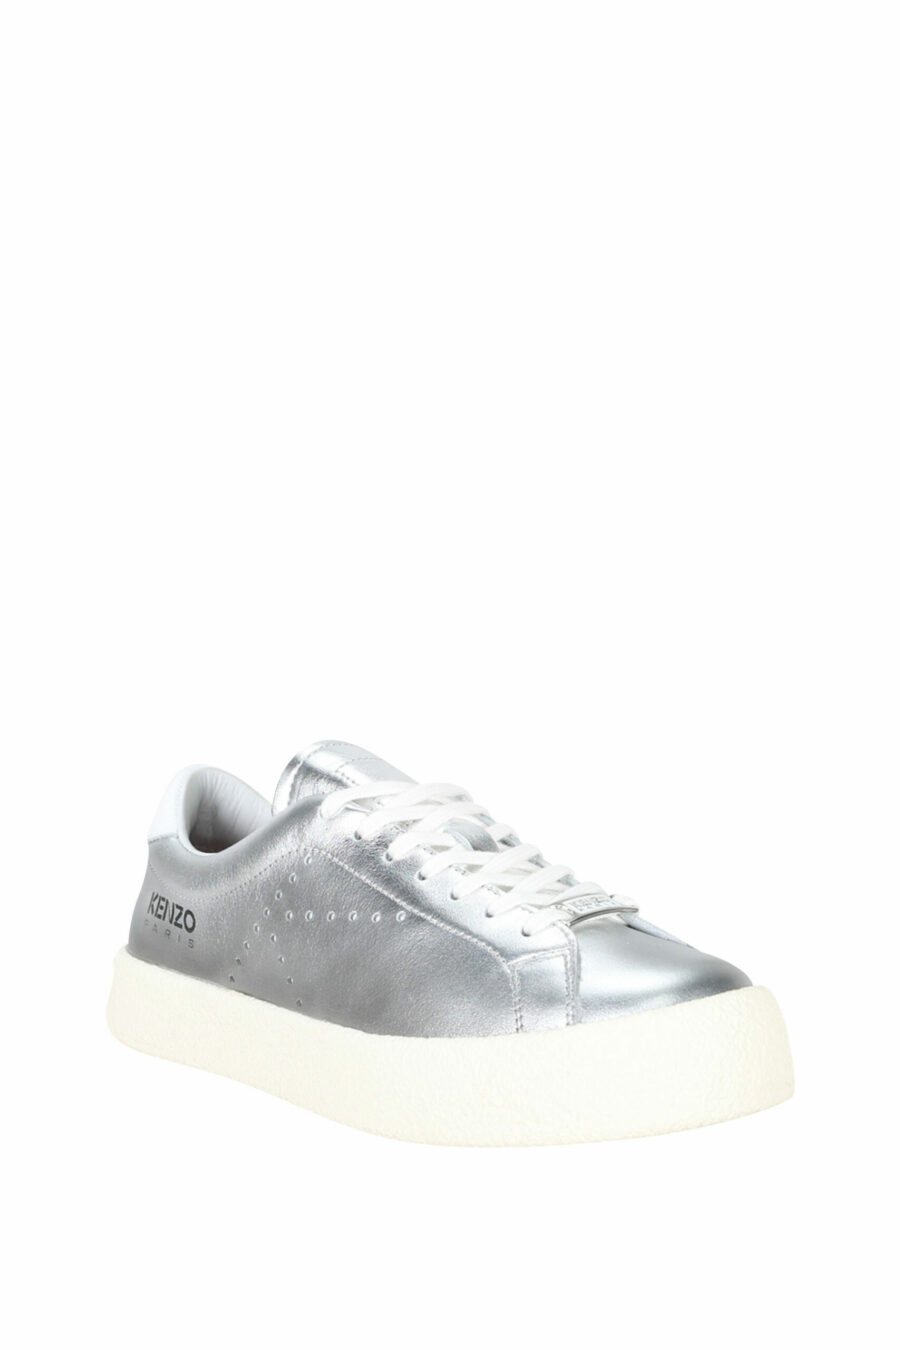 Silver shoes with black mini-logo - 3612230556461 1 scaled